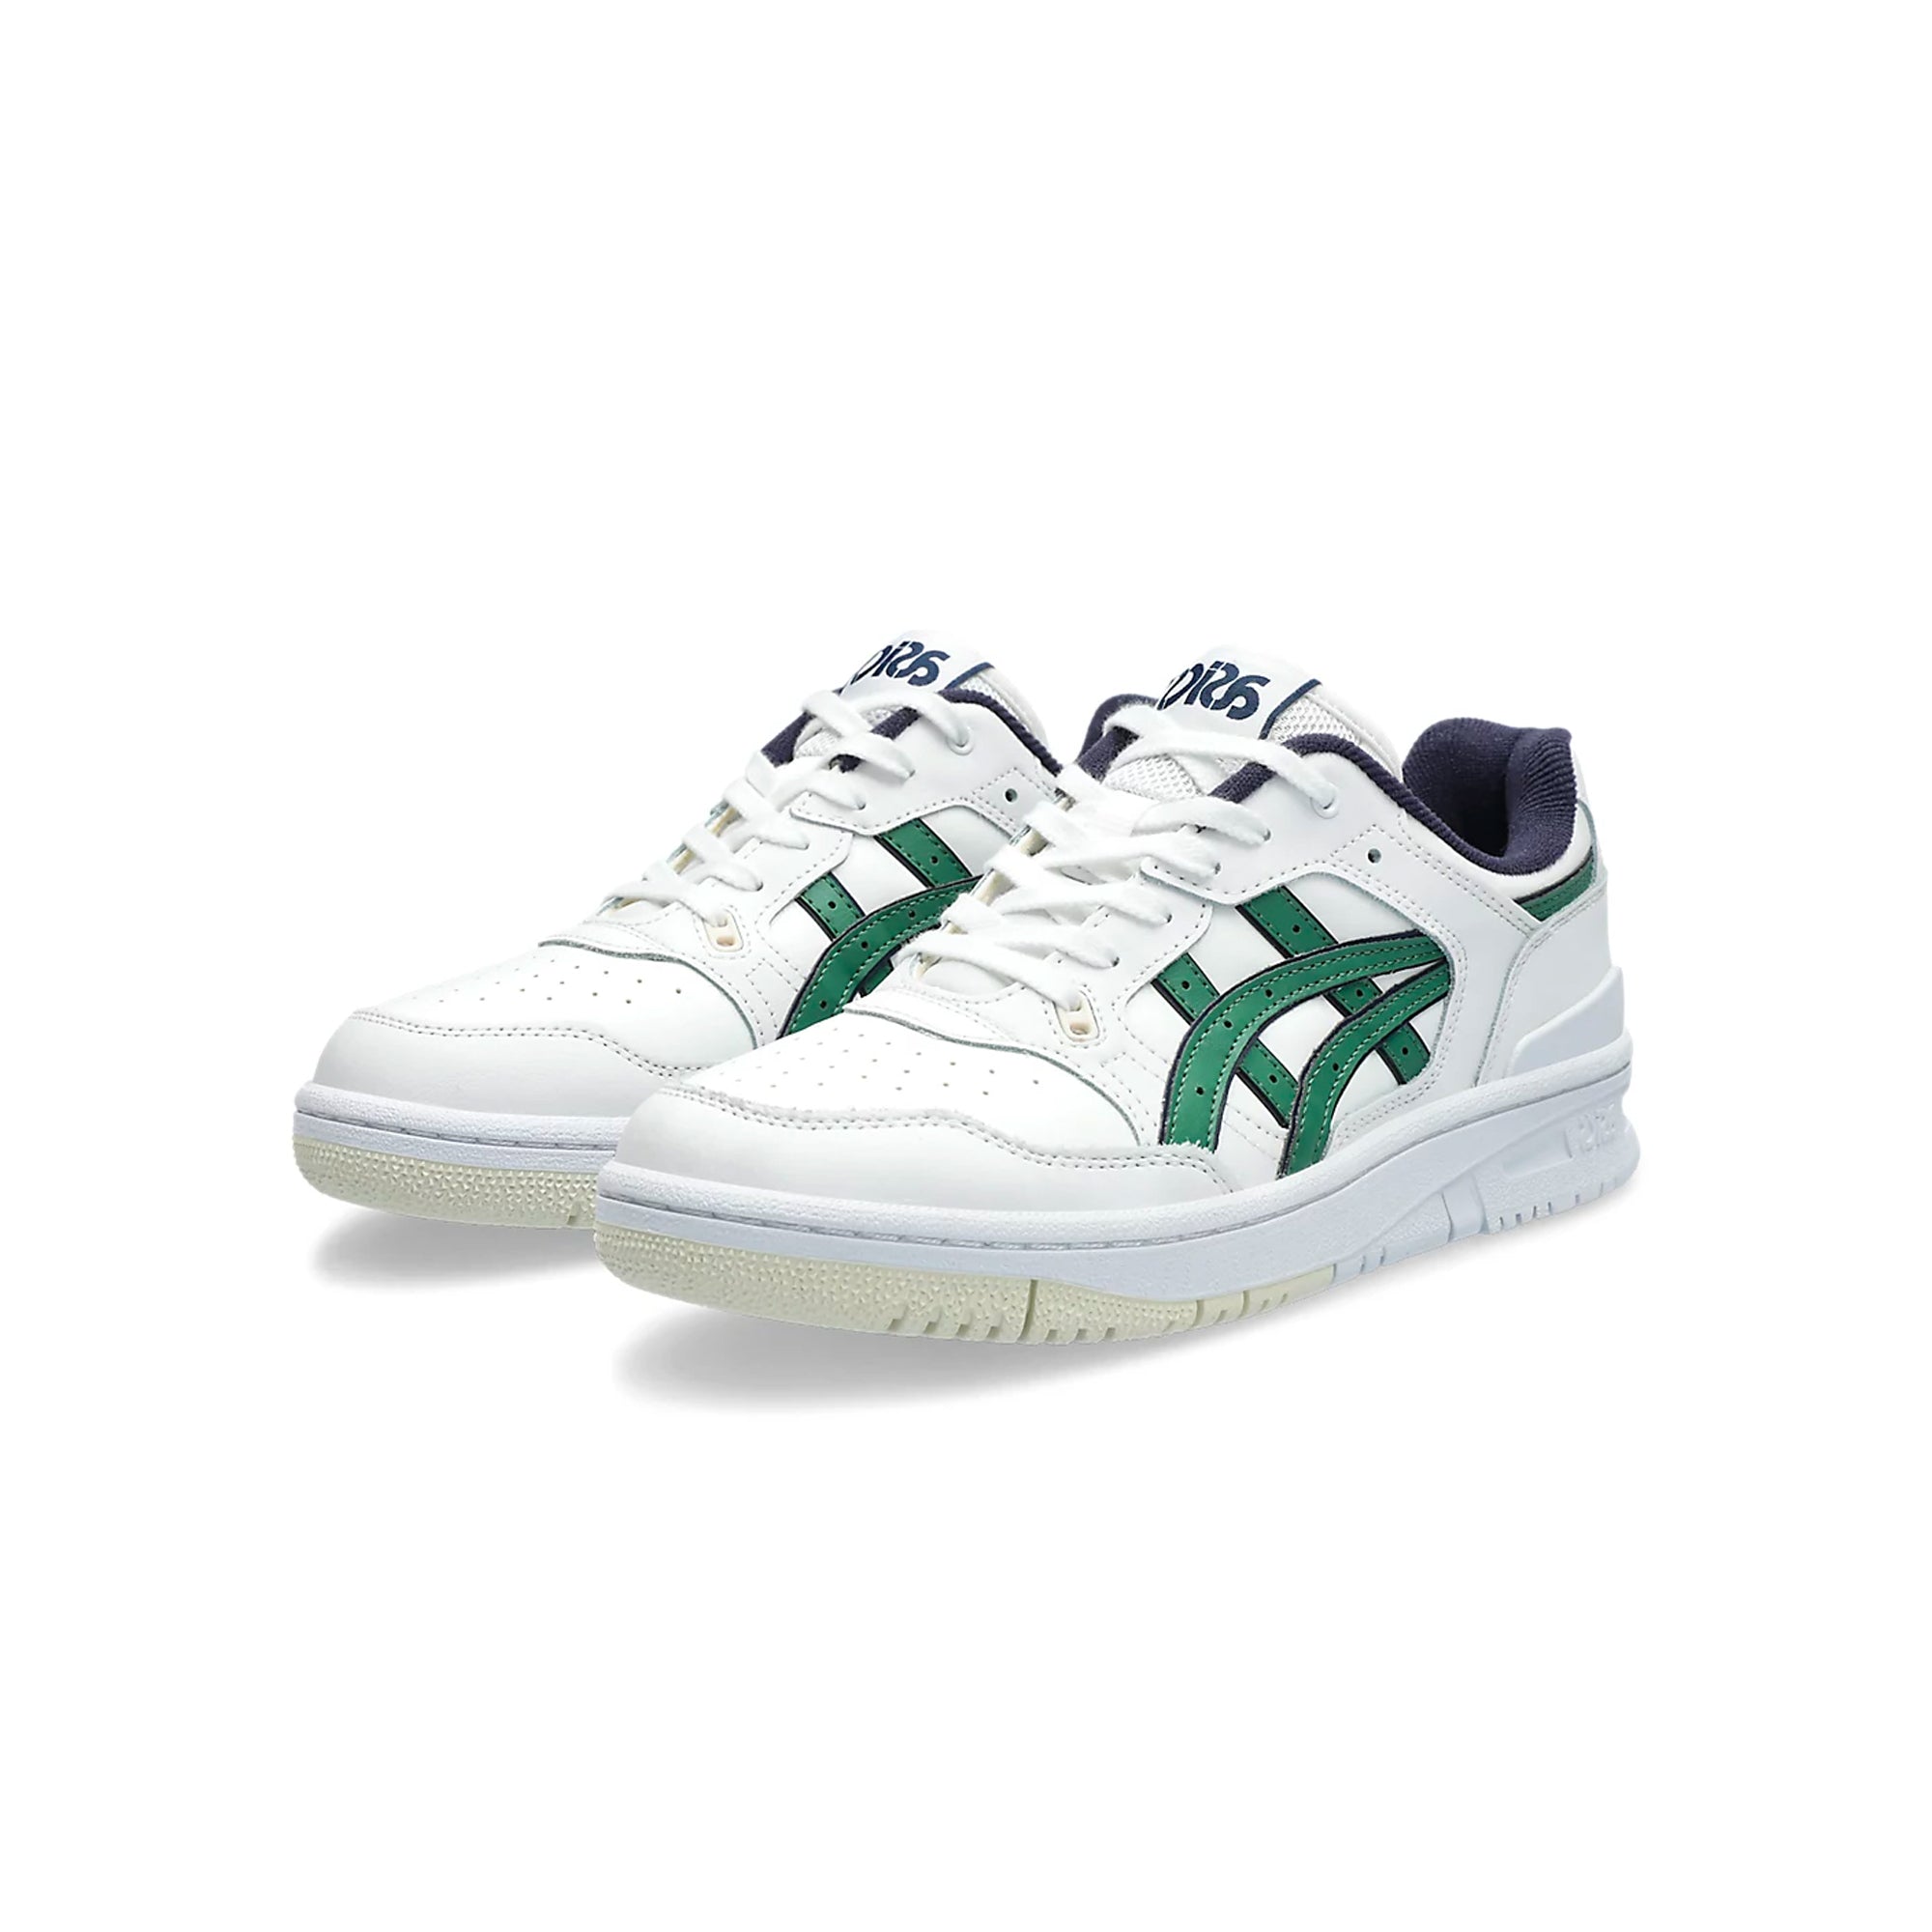 Men's LYTE CLASSIC | Smog Green/Black | Sportstyle Shoes | ASICS | Sneakers  men fashion, Classic sneakers, Classic shoes